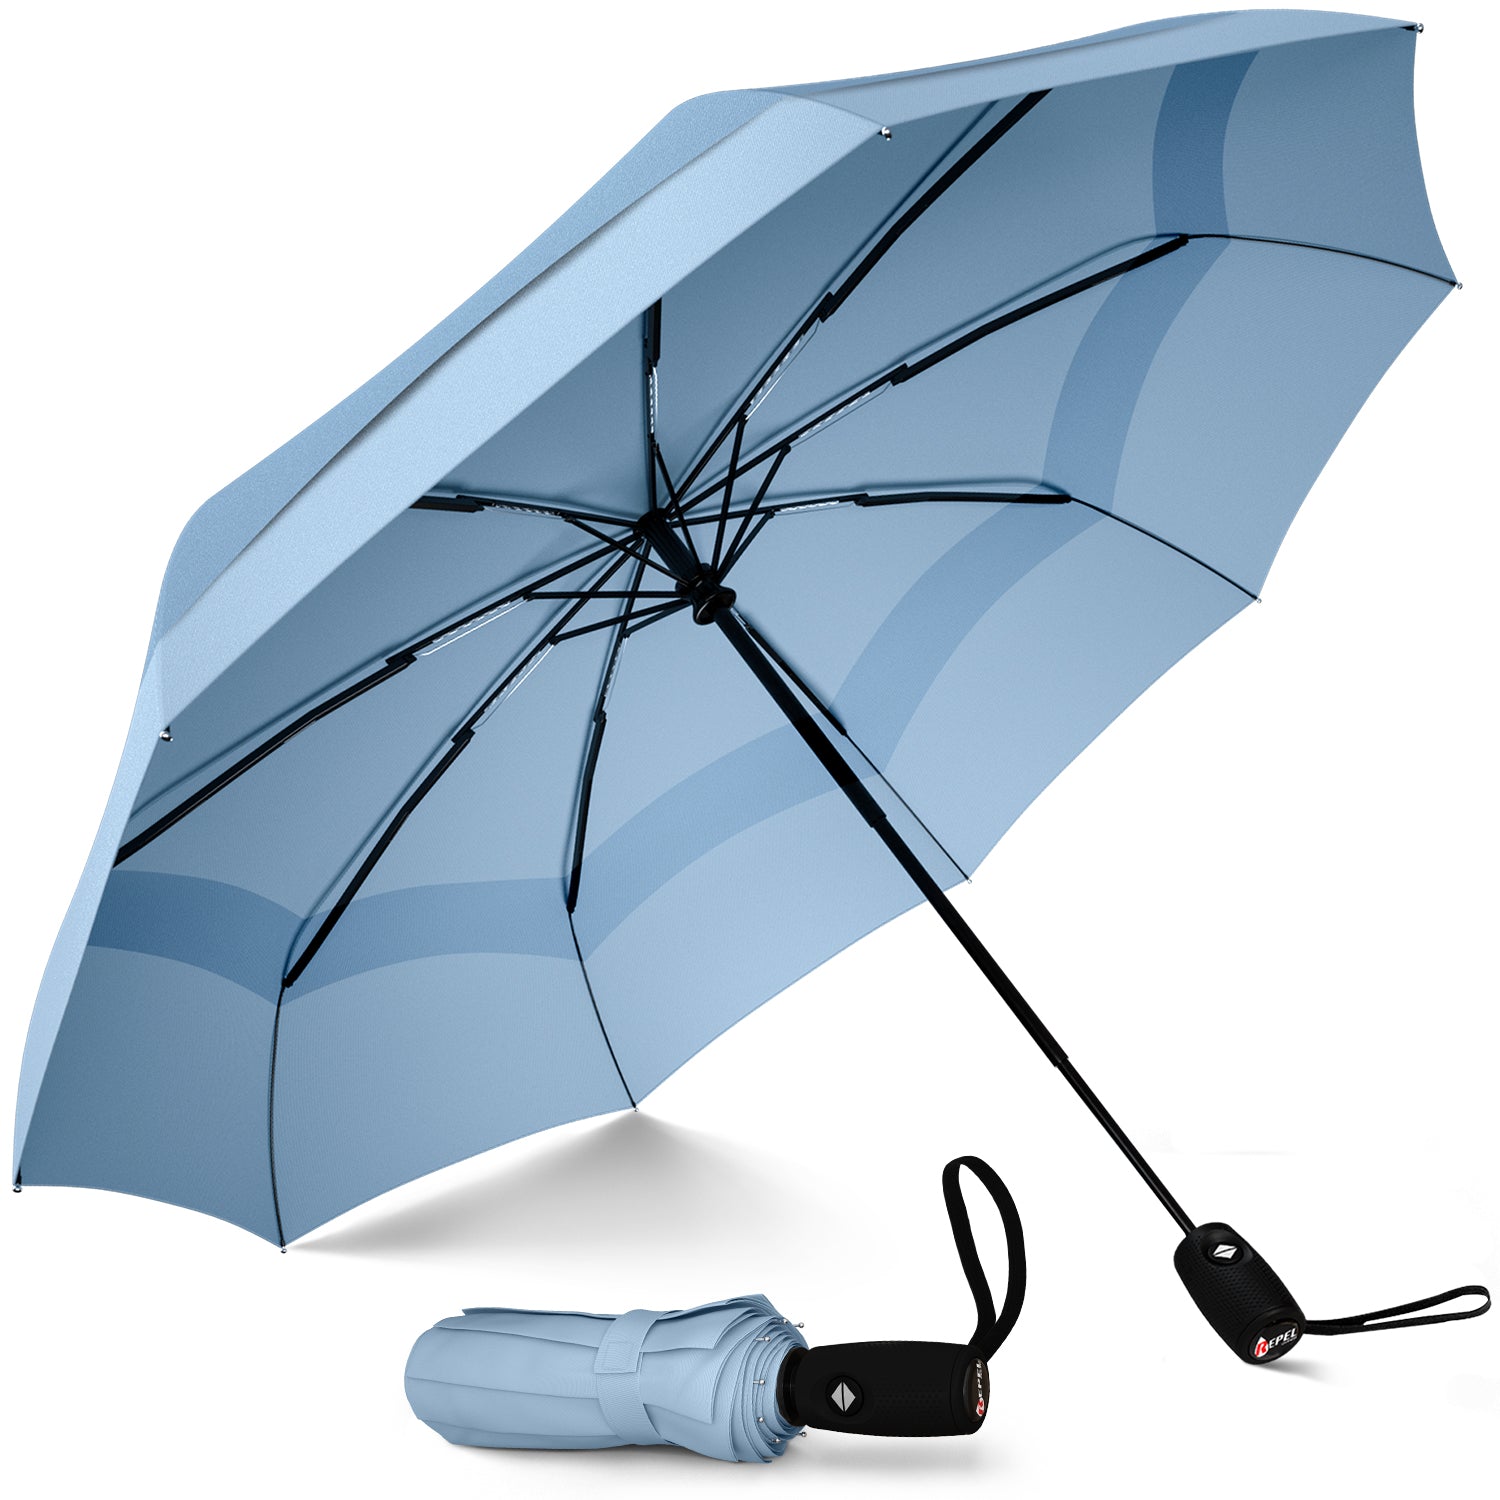 You Can Now Get An Umbrella For Your Purse or Handbag To Keep It Dry In The  Rain